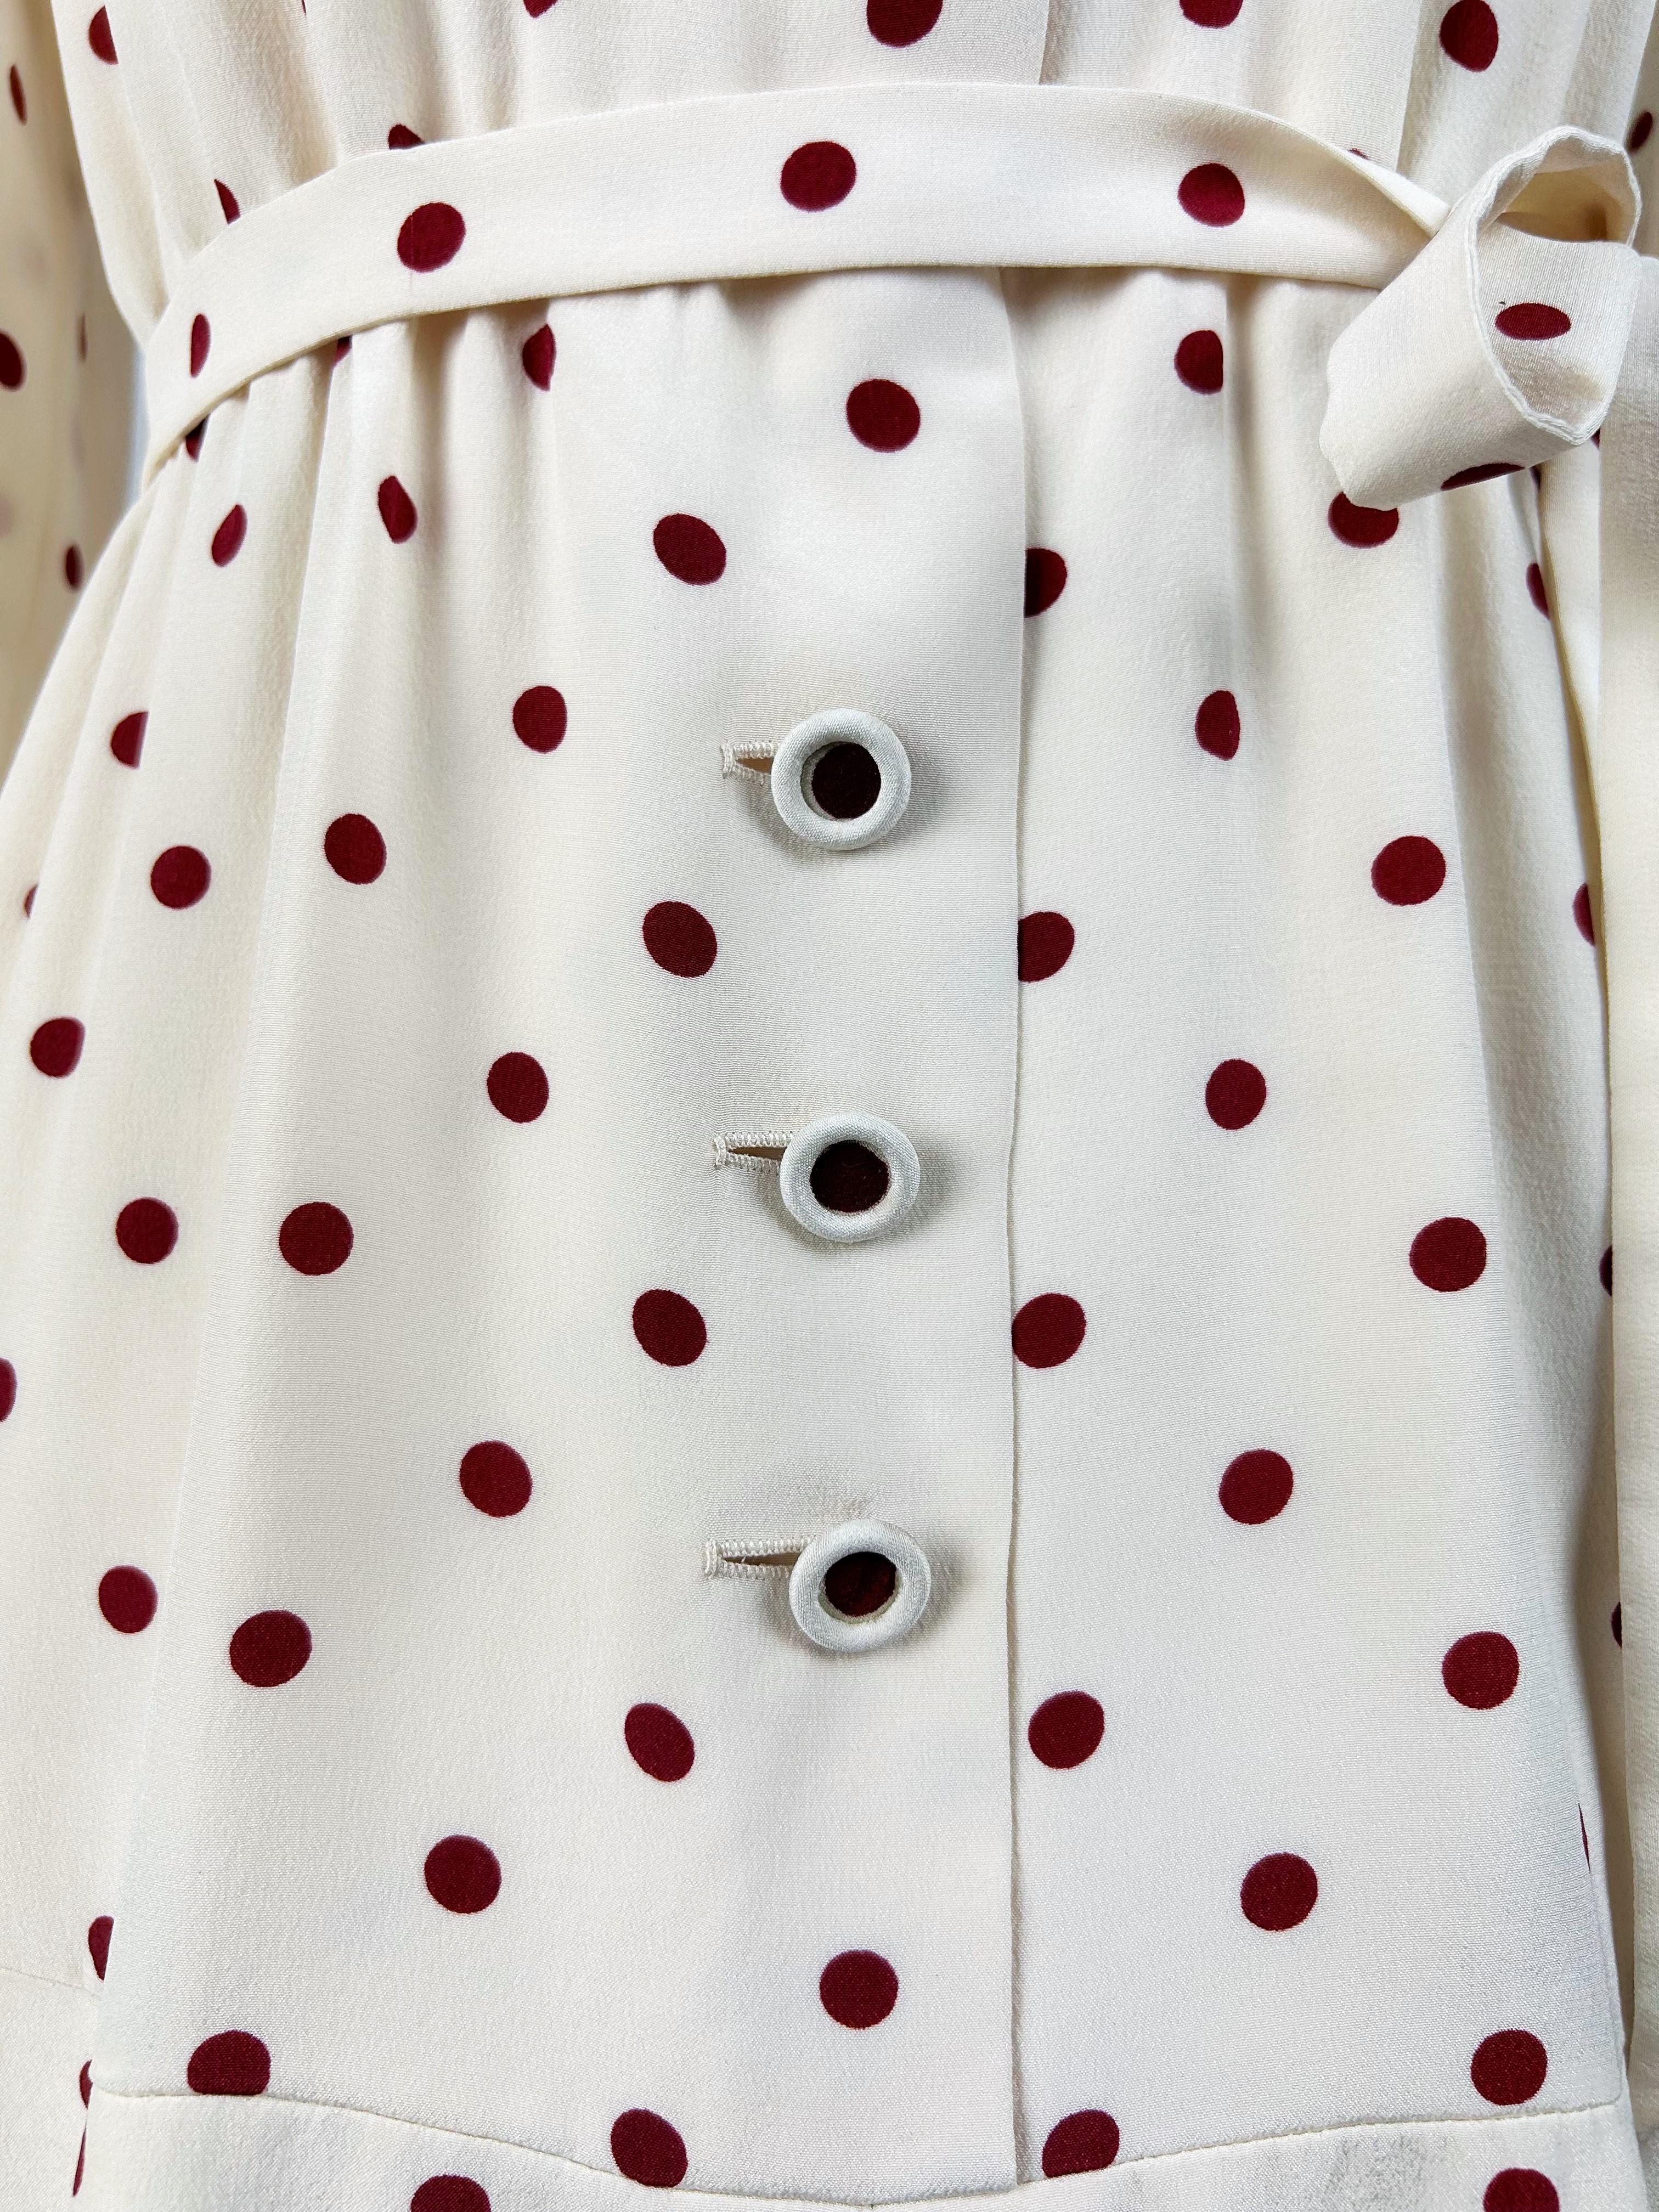 A Polka Dots crepe cocktail dress by Chanel Haute Couture numbered 59644 C. 1975 For Sale 6